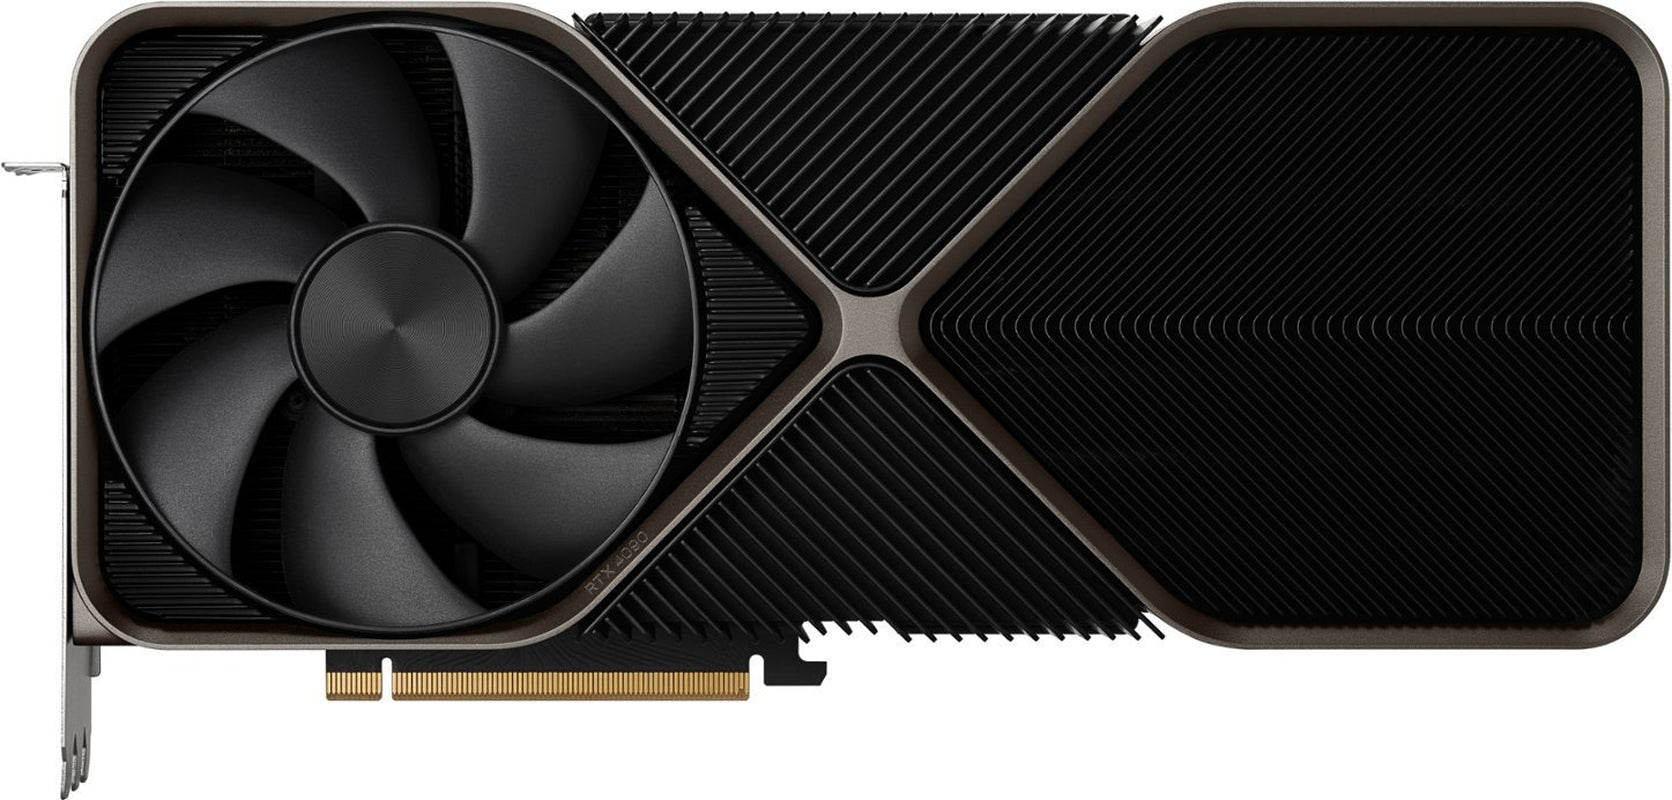 Geforce RTX 4090 Founders Edition Graphics Card 24GB GDDR6X - Titanium and Black